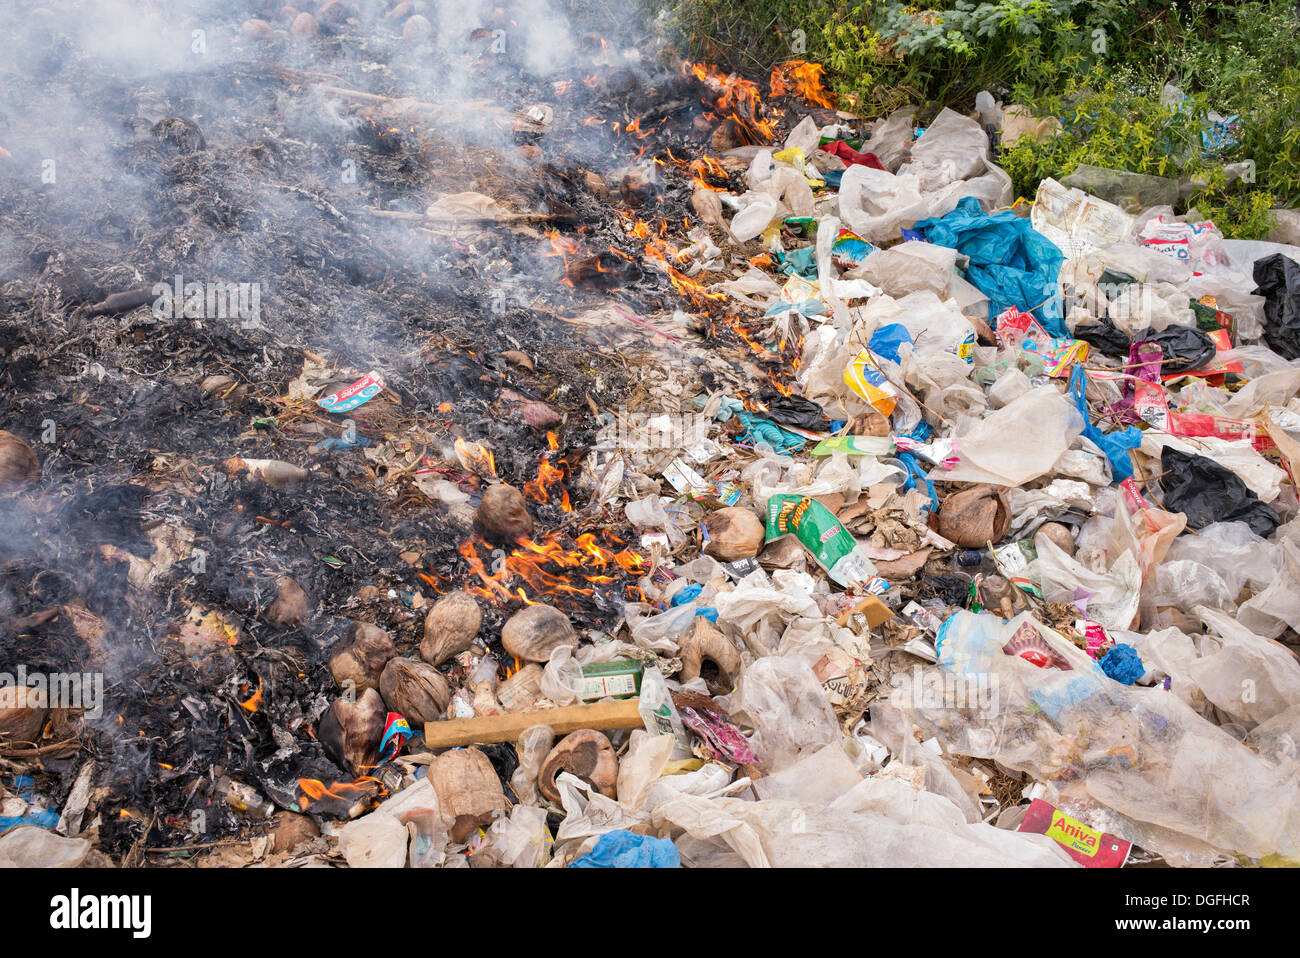 Burning plastic waste in the Indian countryside Stock Photo